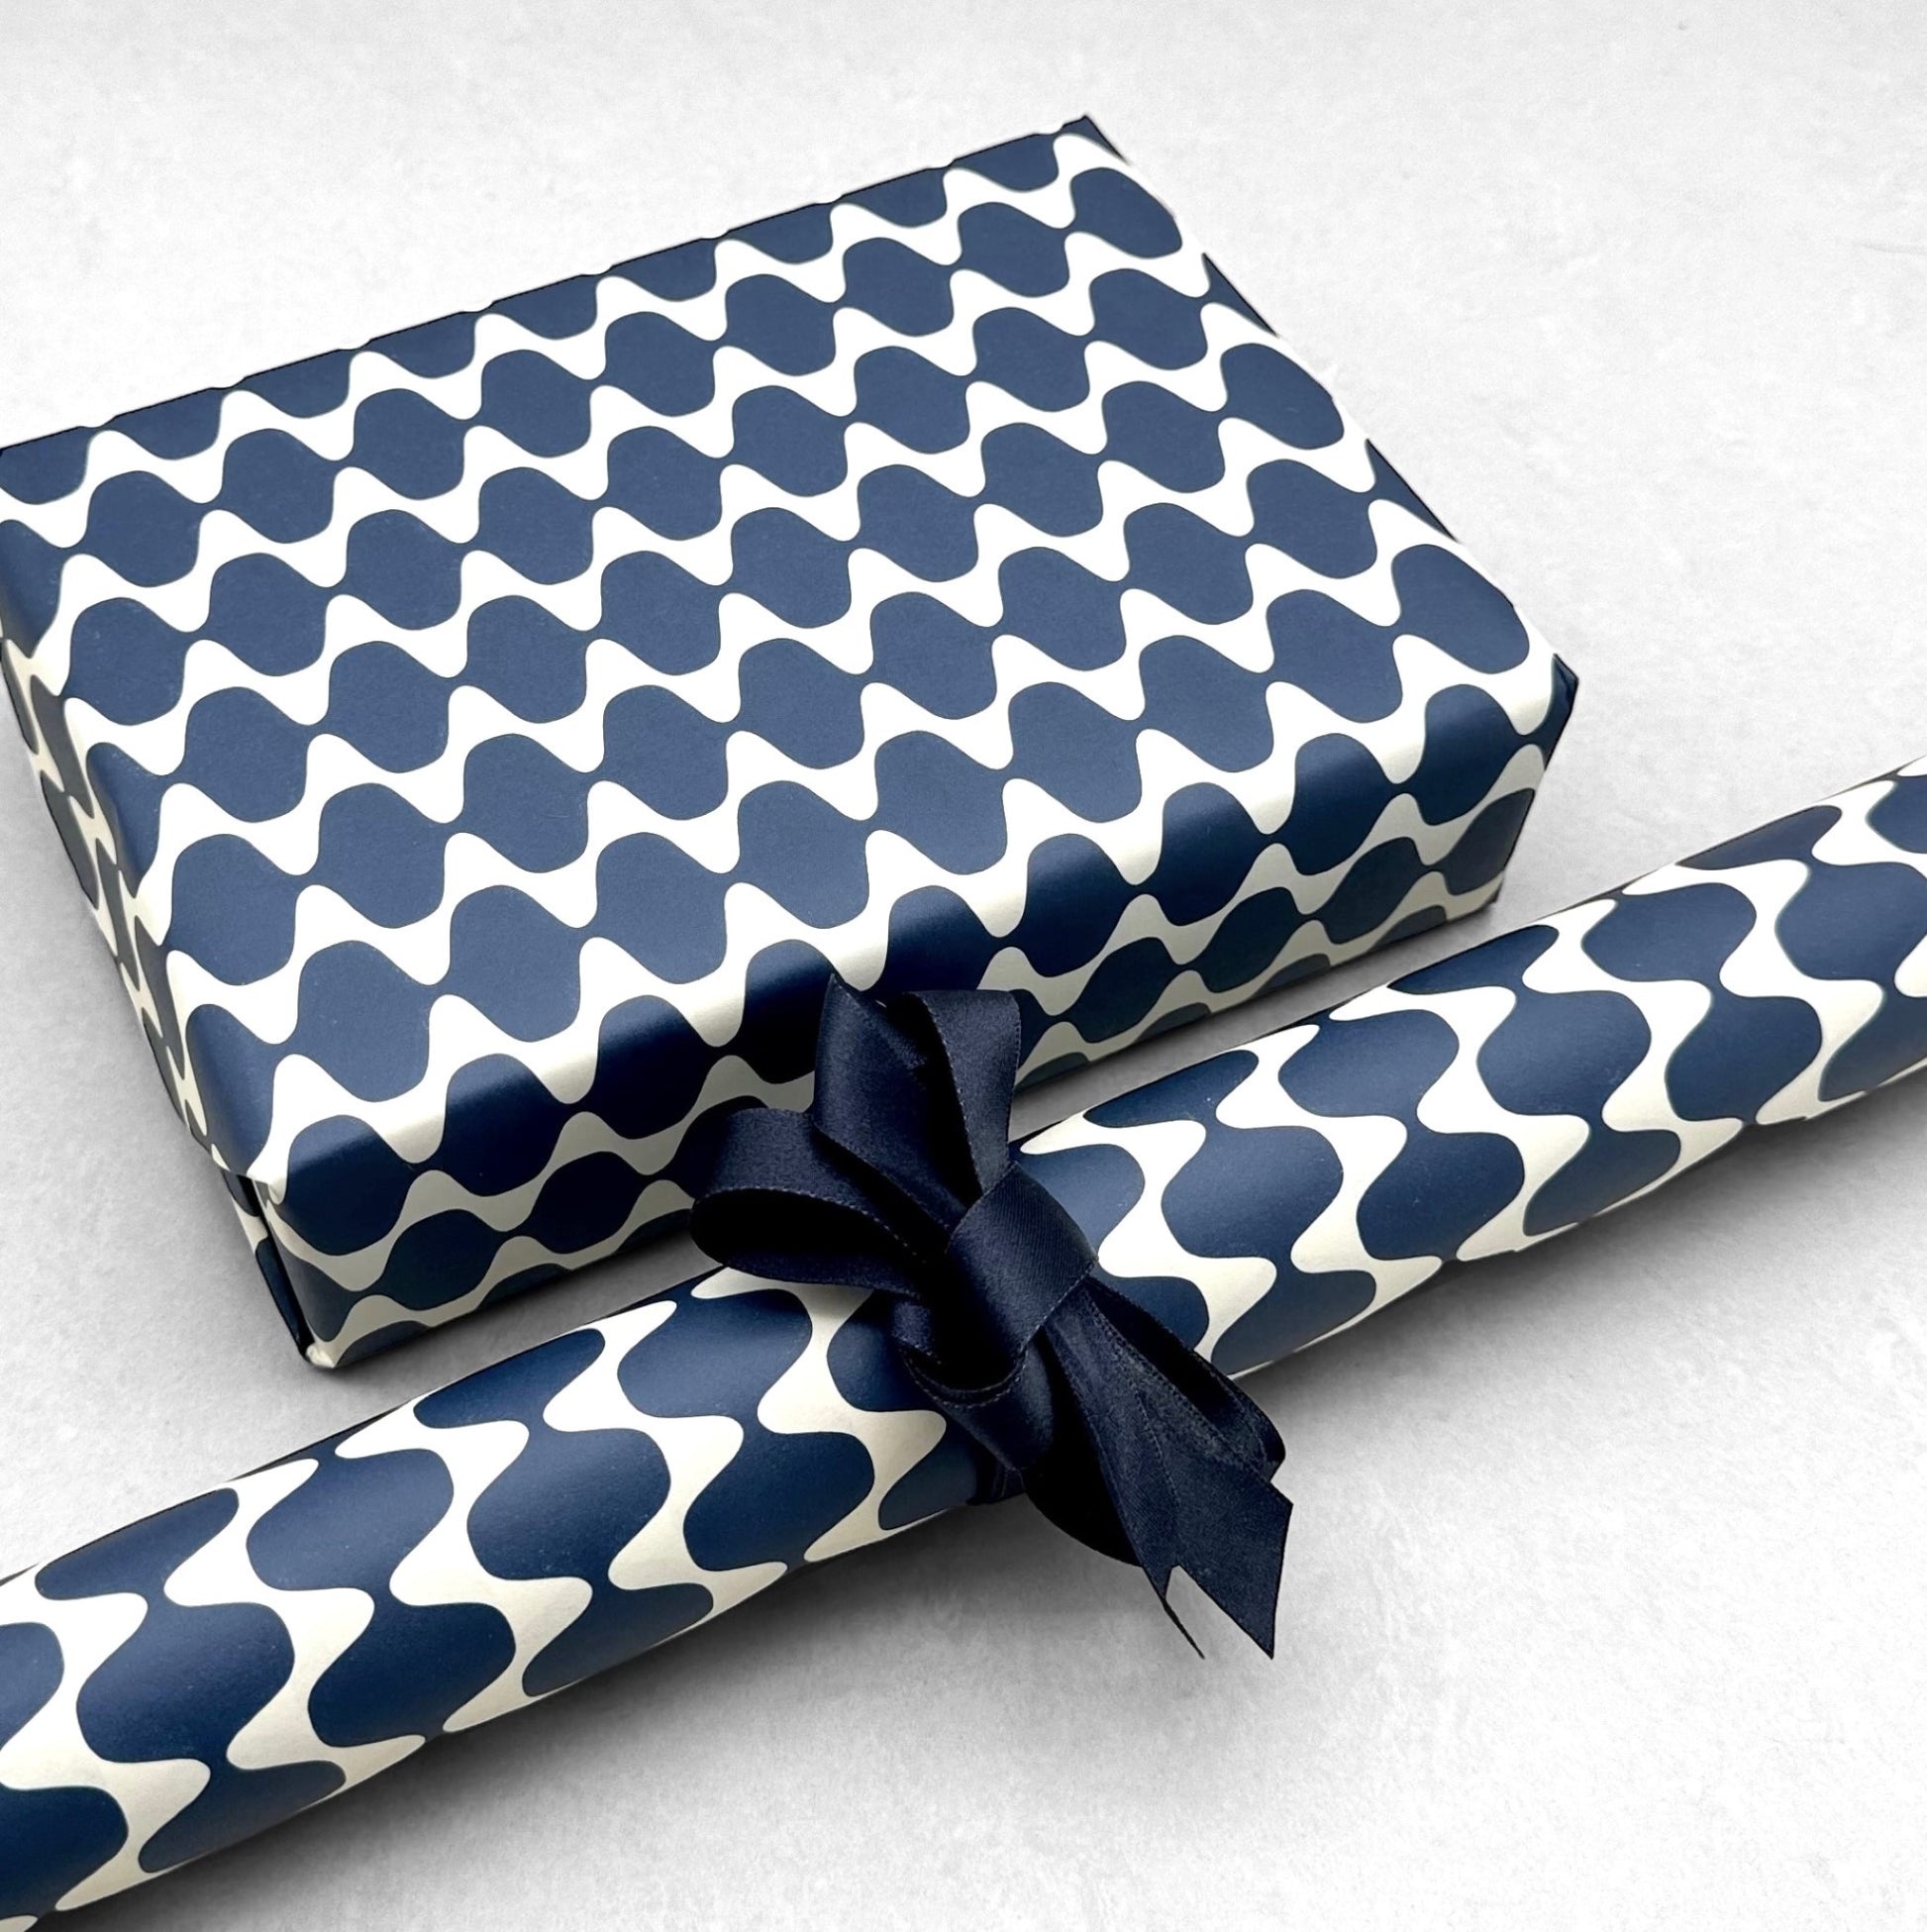 wrapping paper by Otto Editions with a cut-out wavy design in white on an indigo background. Pictured wrapped as a present with a roll of the paper